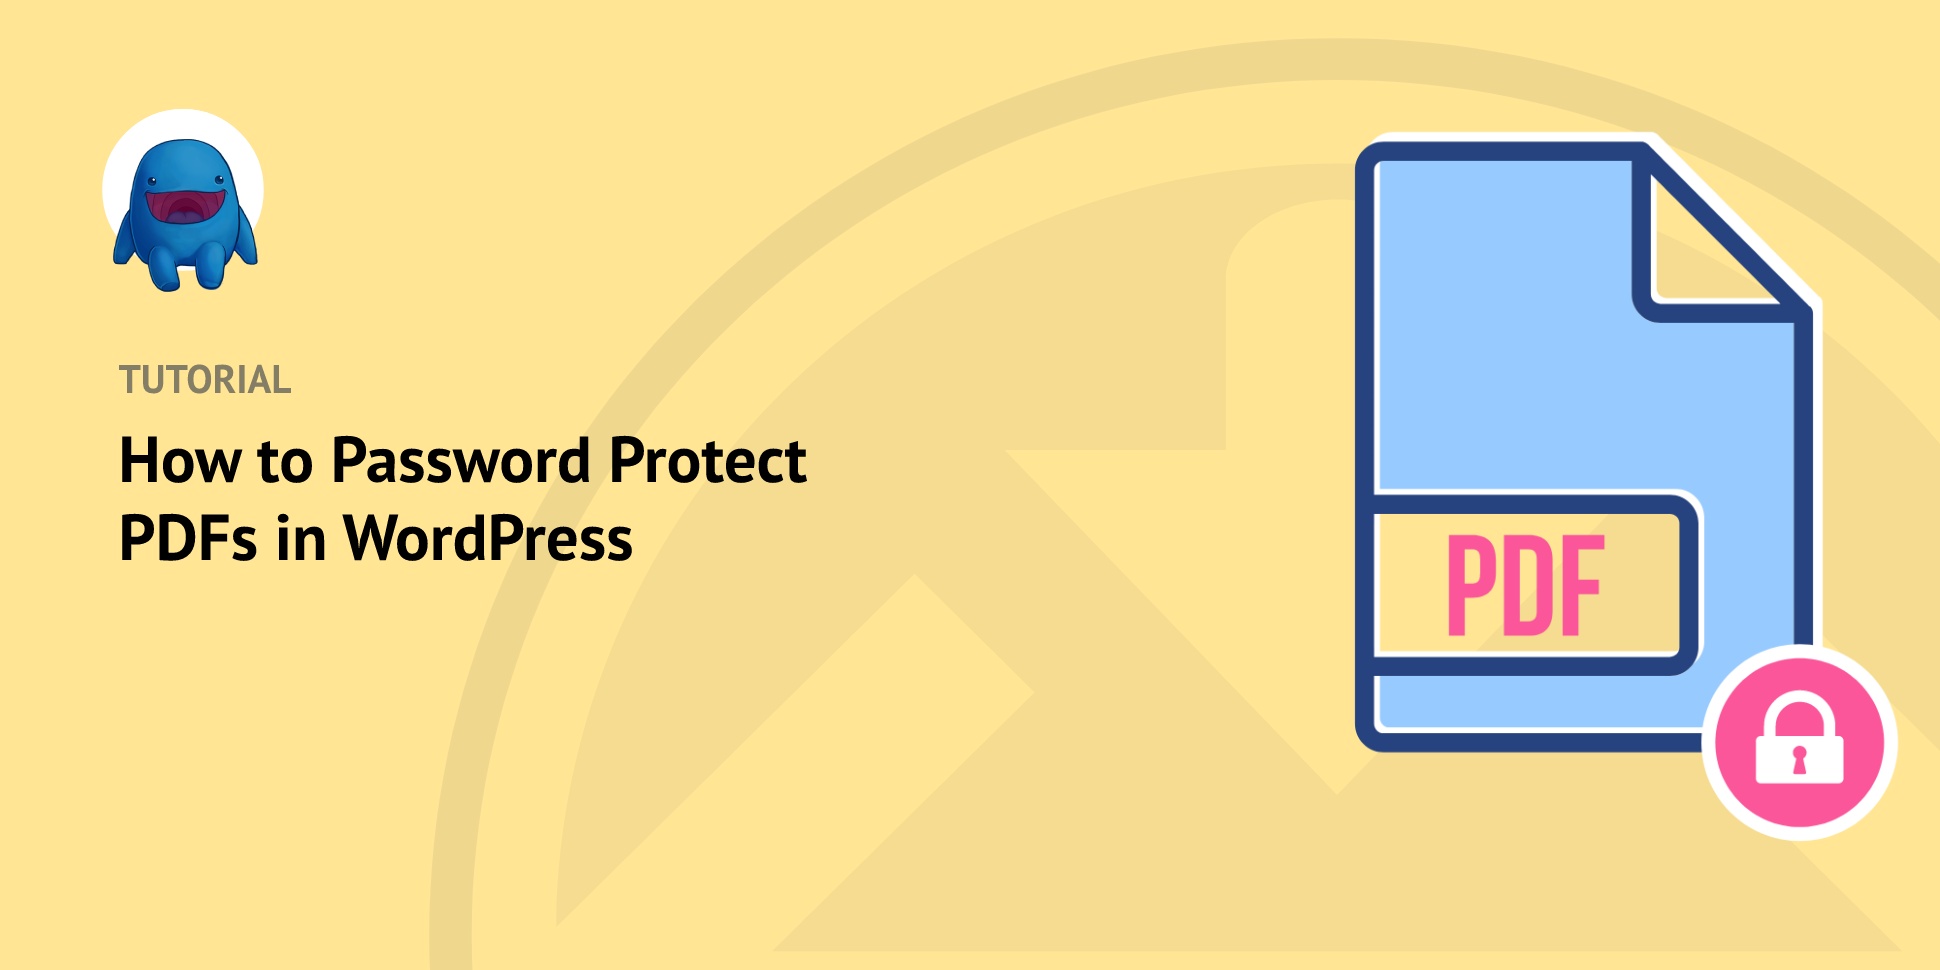 How to Password Protect PDFs in WordPress